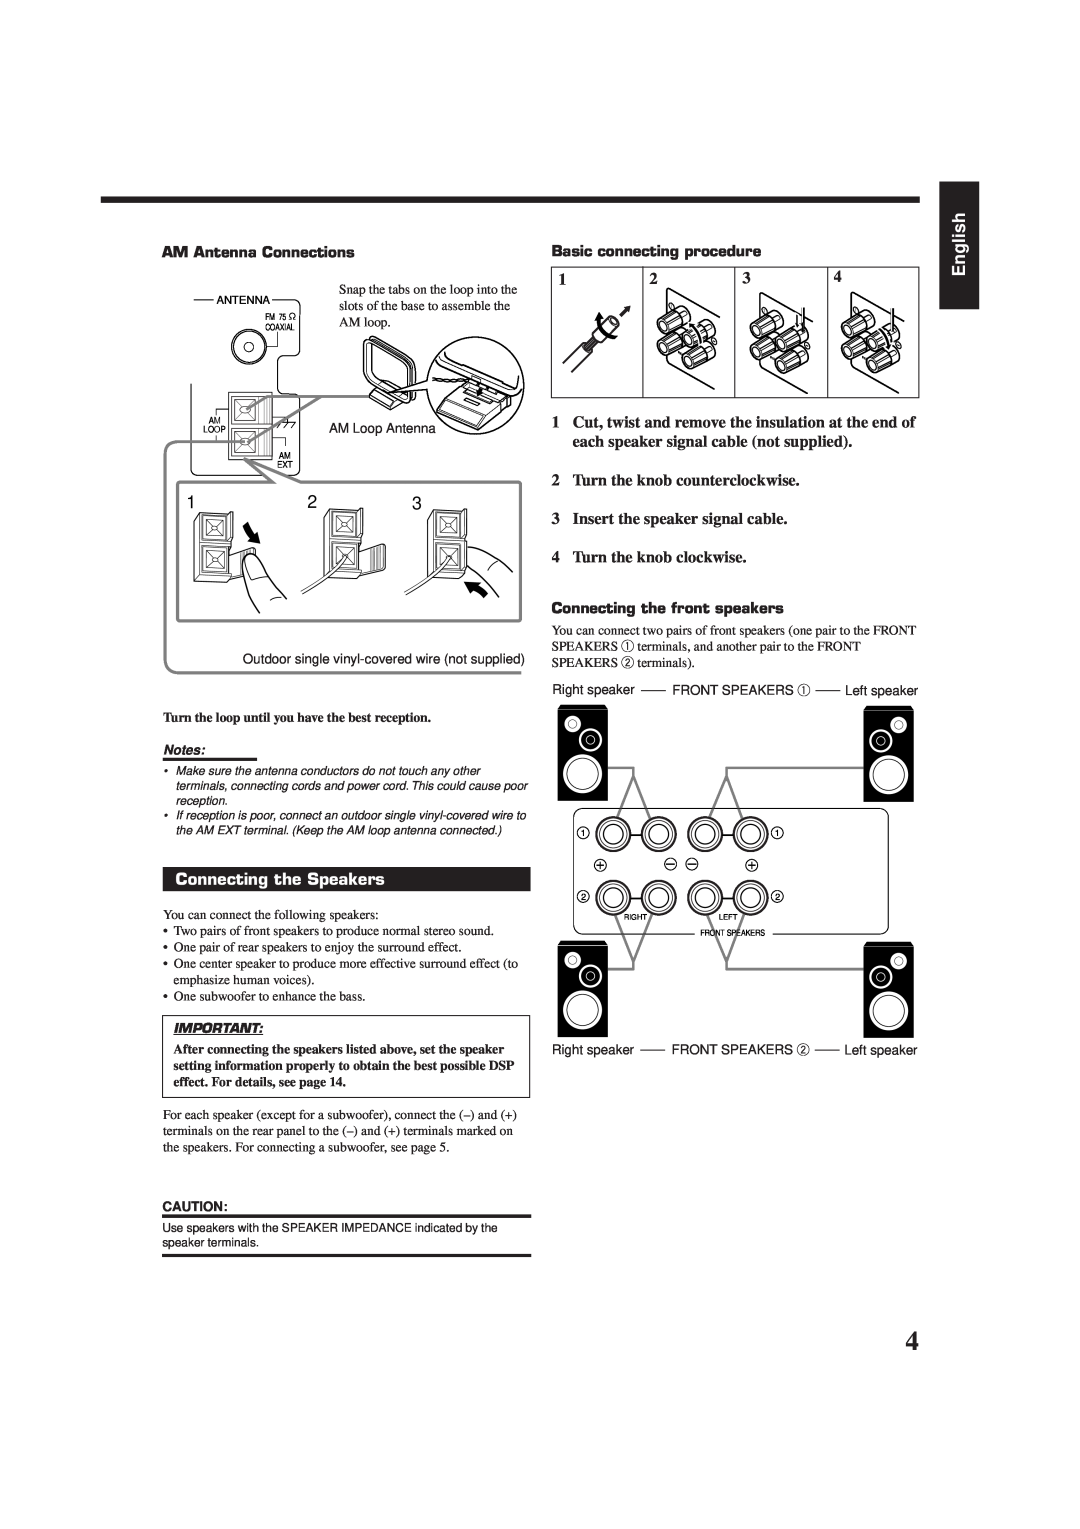 JVC RX-7001PGD manual English, Connecting the Speakers, AM Antenna Connections, Basic connecting procedure 